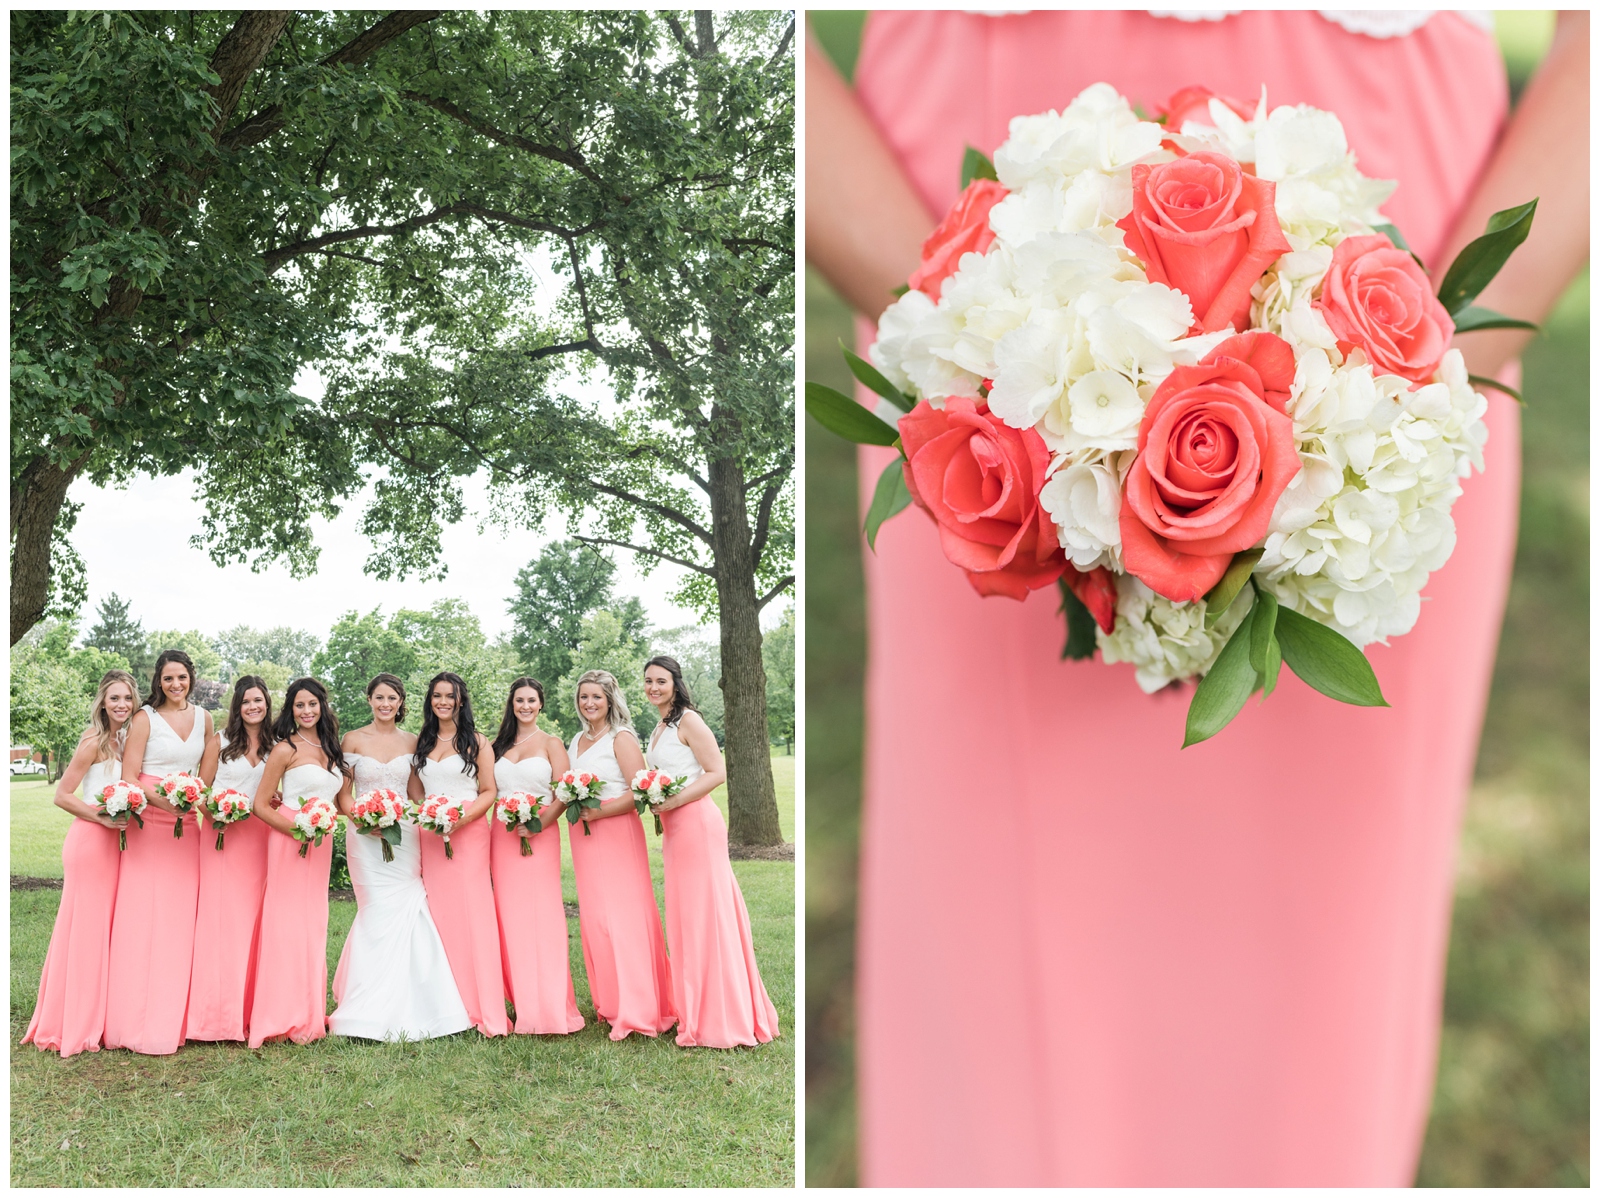 bride poses with bridesmaids in coral gowns with white tops and bouquets with coral and white flowers